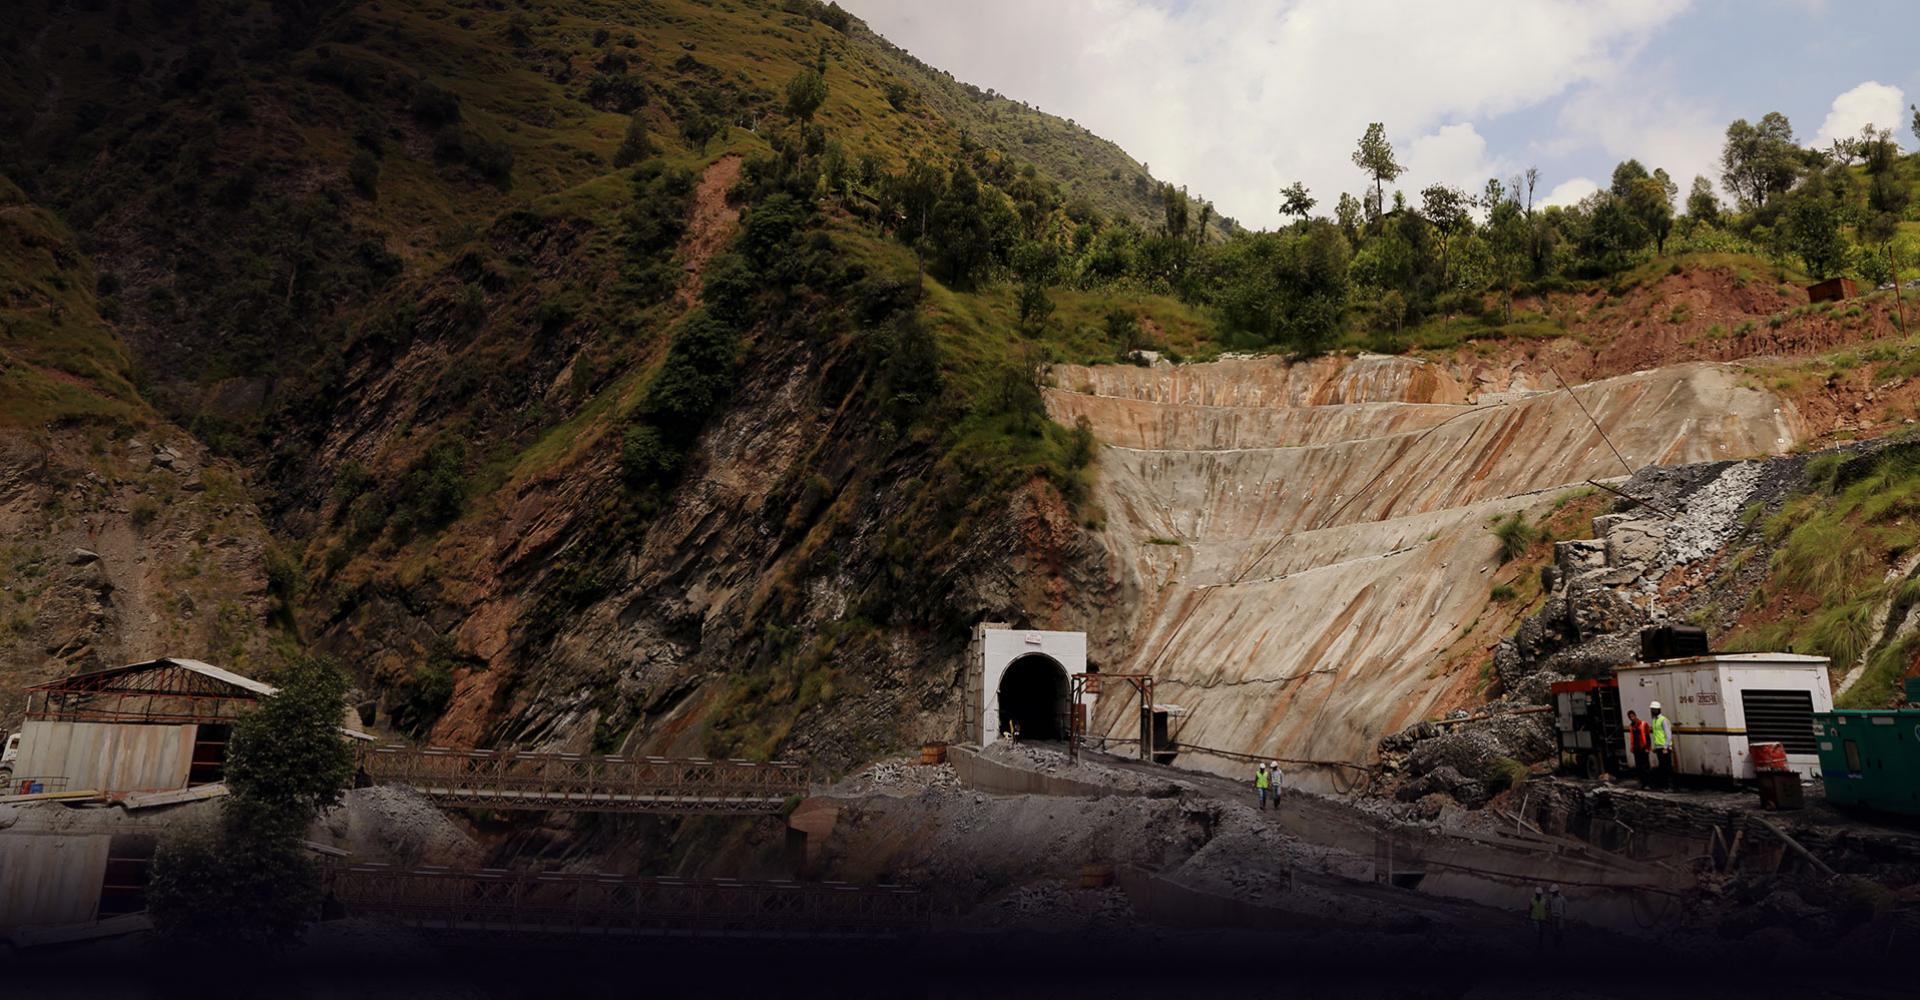 Tunnel 3: KRCL Tunnel, J&K, India